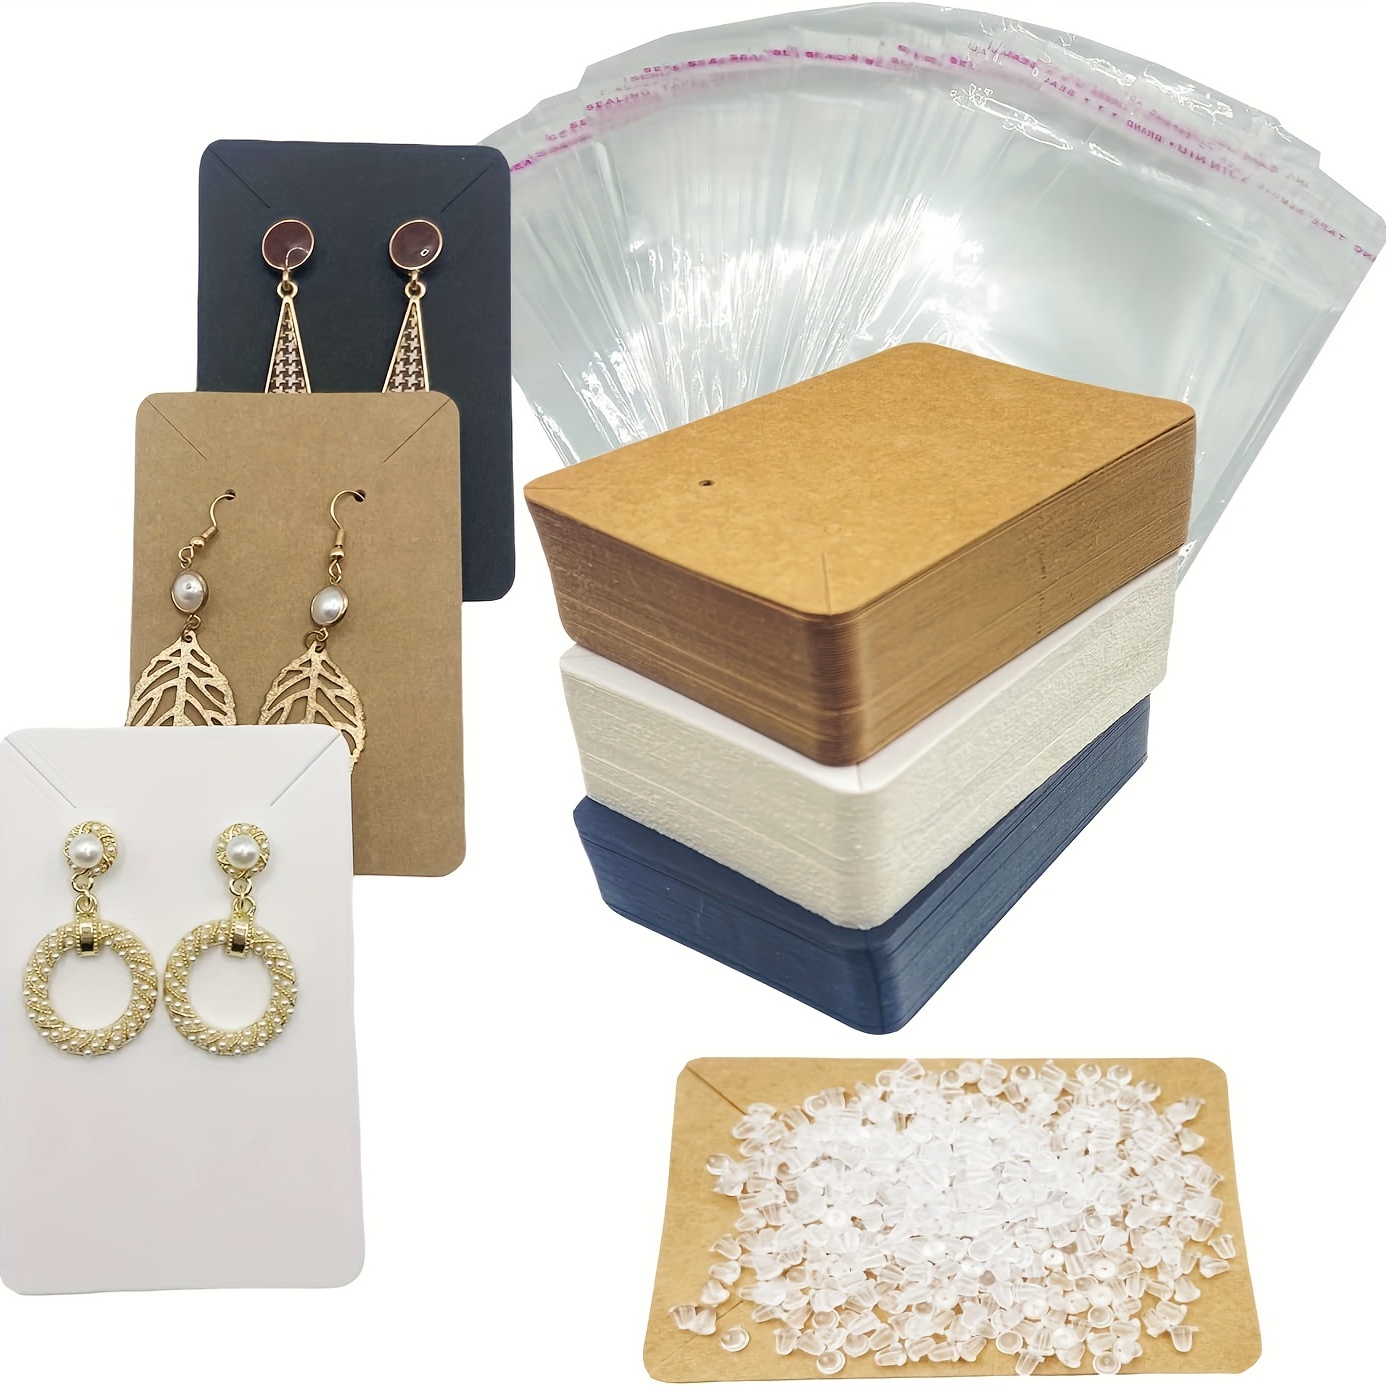 Temlum 50 Pcs Standing Earring Display Cards, Earring Cards for Selling  Earring Holder Cards Earring Packaging for Small Business Jewelry Supplies